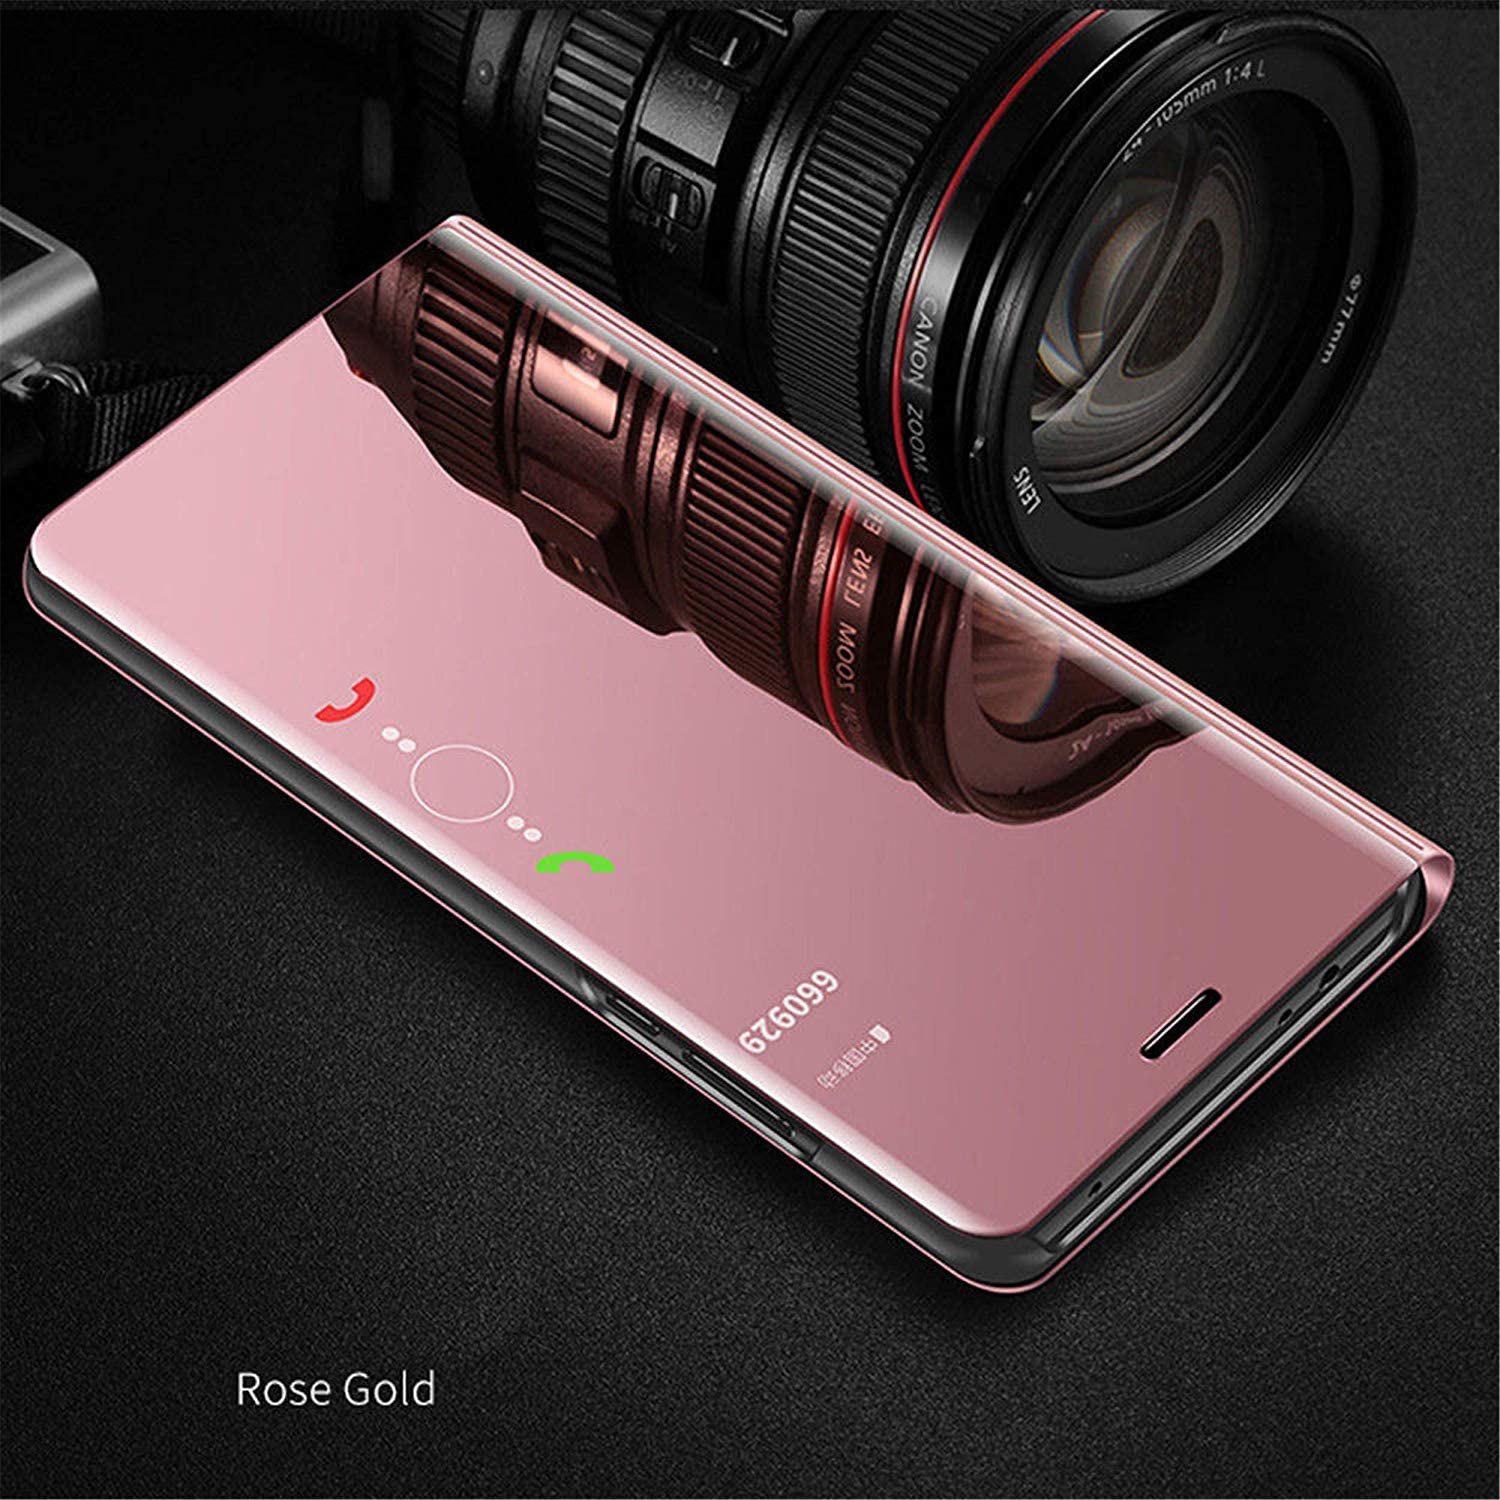 Samsung Galaxy S10 Mobile Phone Case Mirror Protective Cover